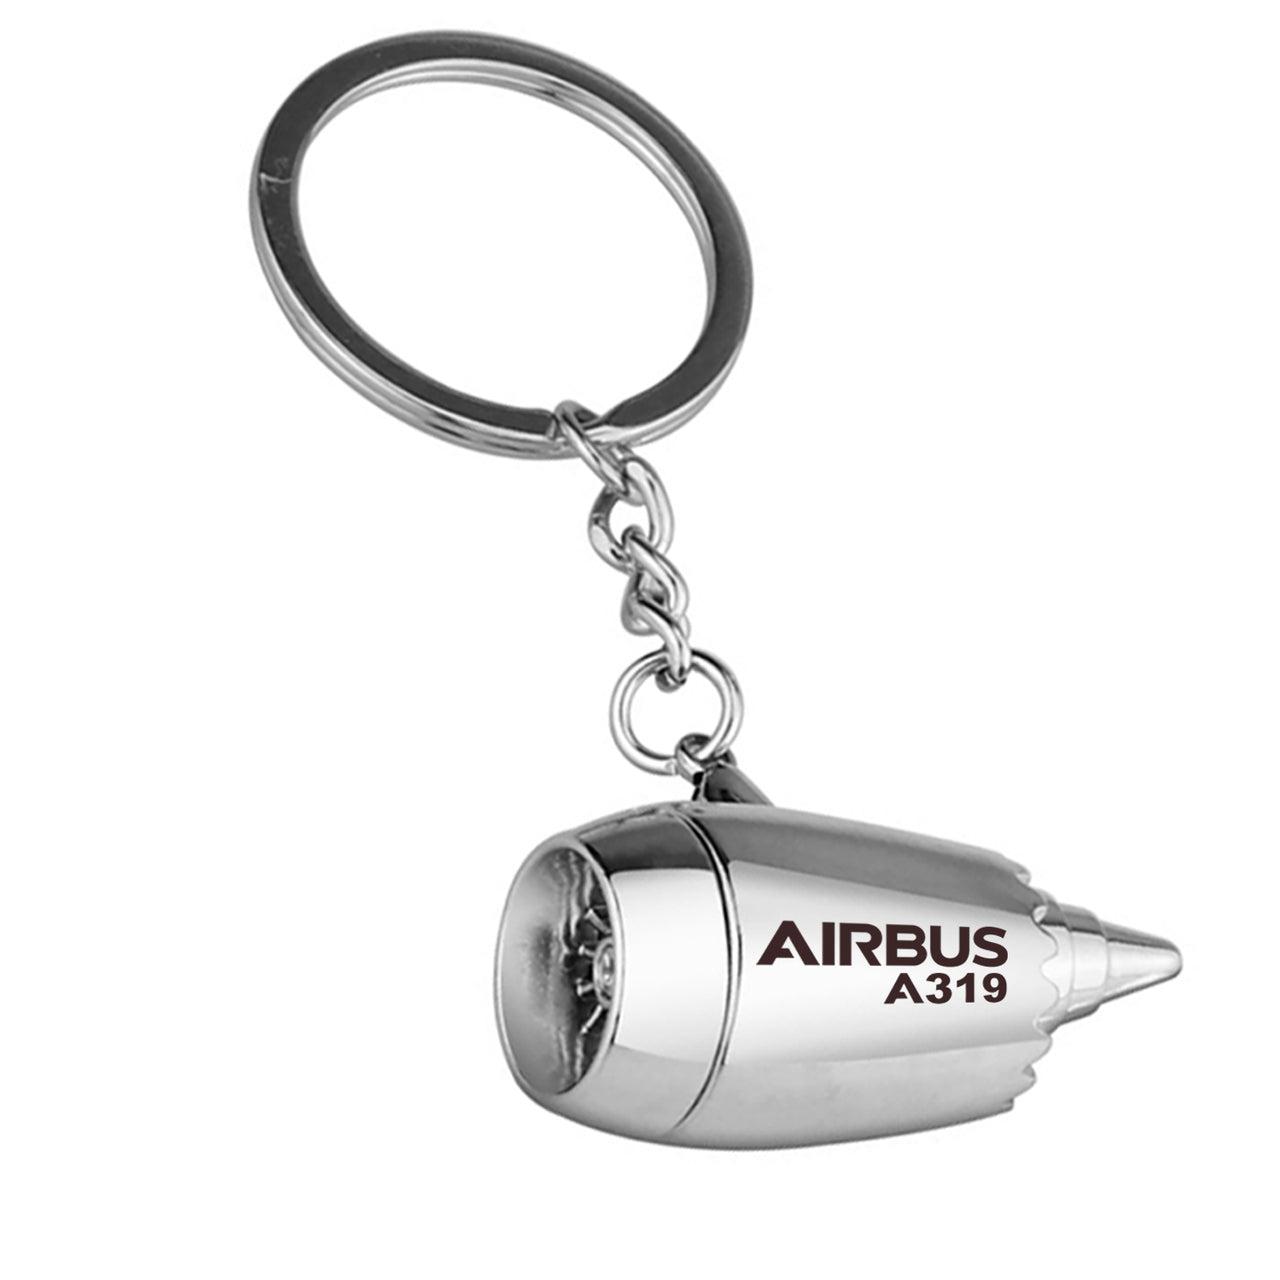 Airbus A319 & Text Designed Airplane Jet Engine Shaped Key Chain